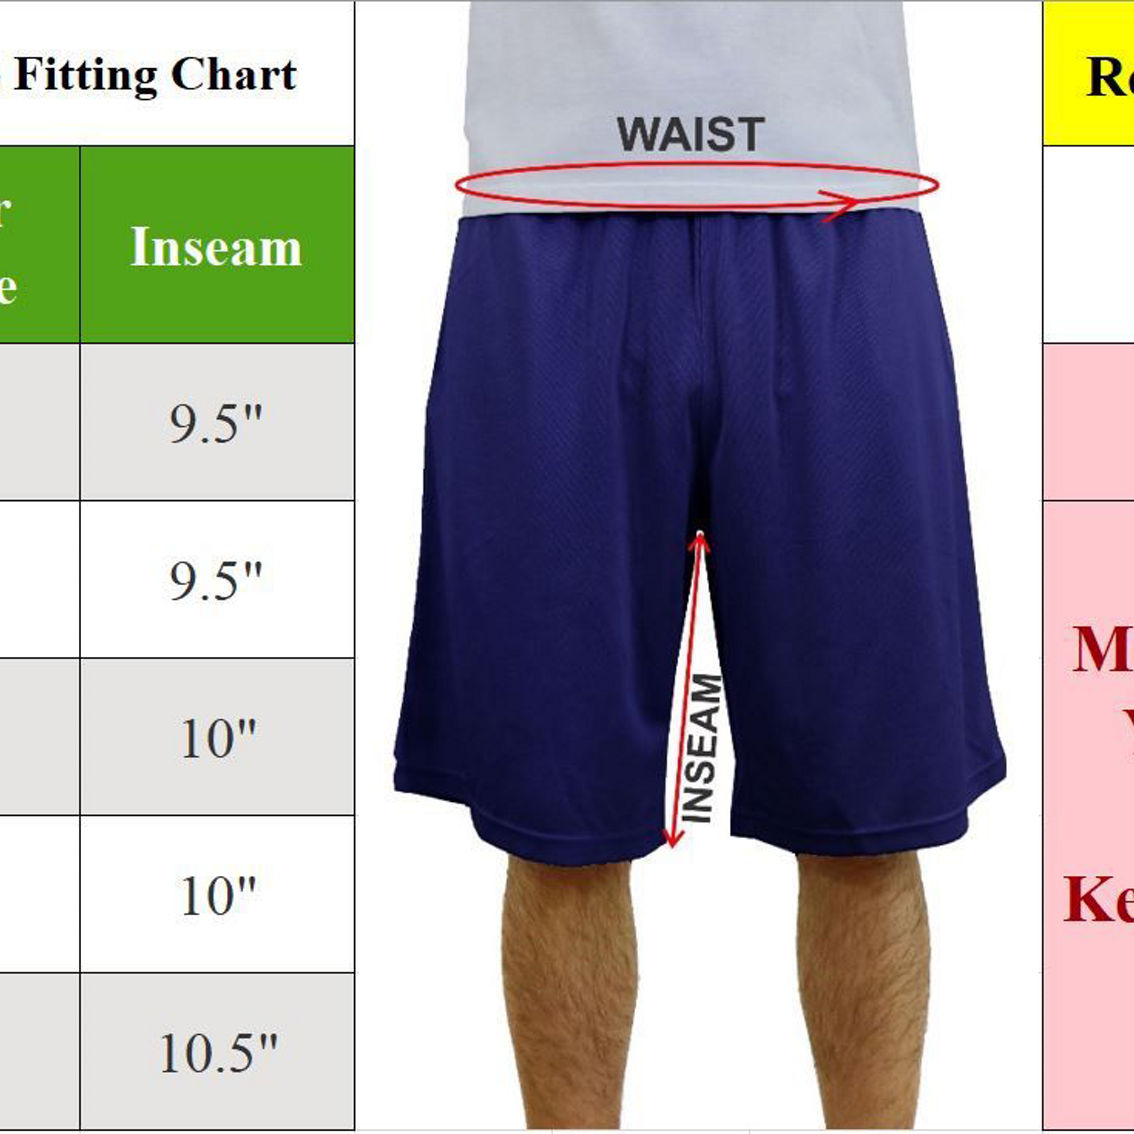 Galaxy By Harvic Men's Moisture Wicking Quick Dry Performance Mesh Shorts W Trim - Image 3 of 3